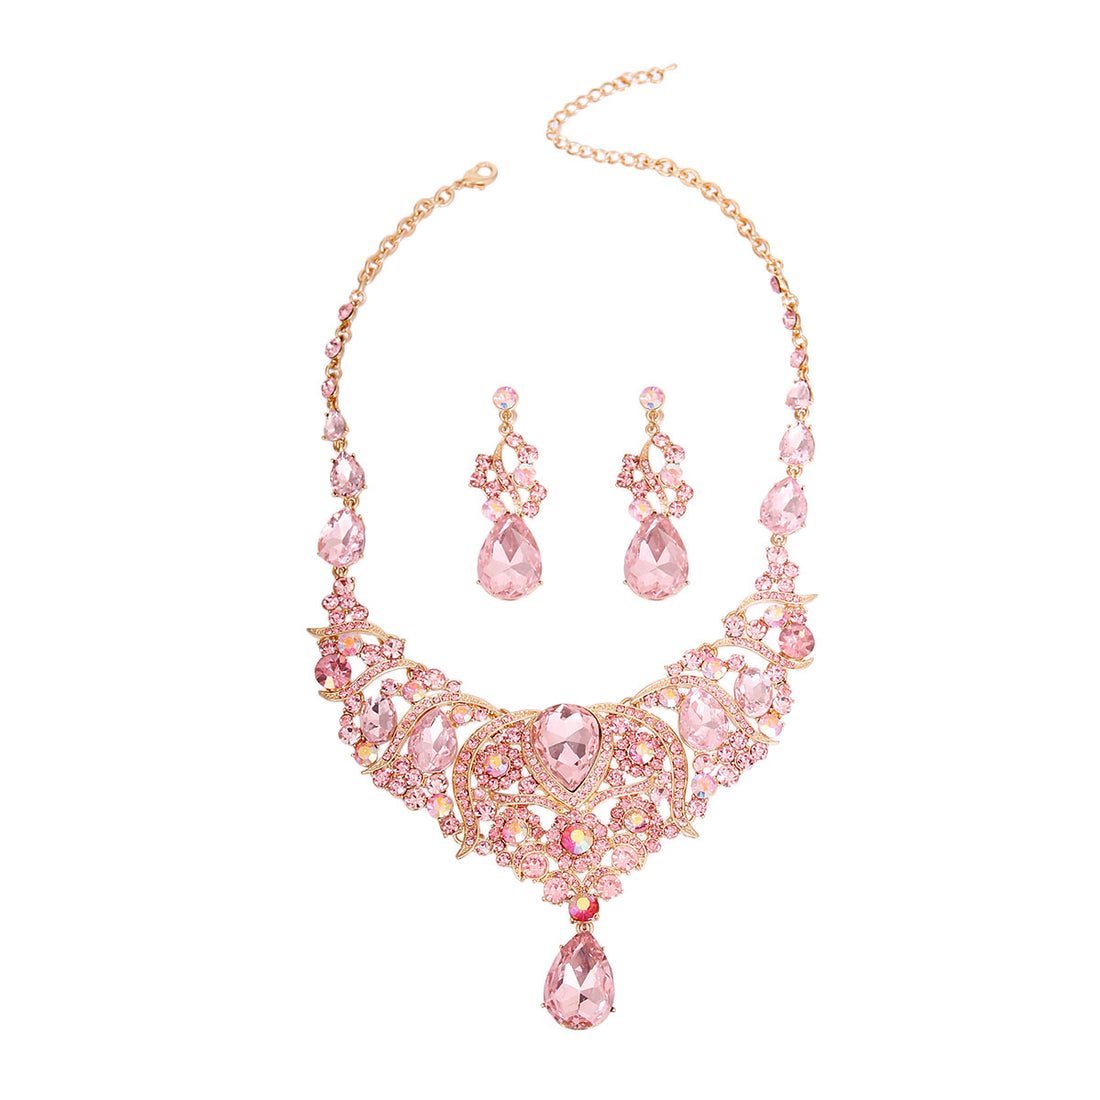 Pink and Gold Crystal Bib Necklace